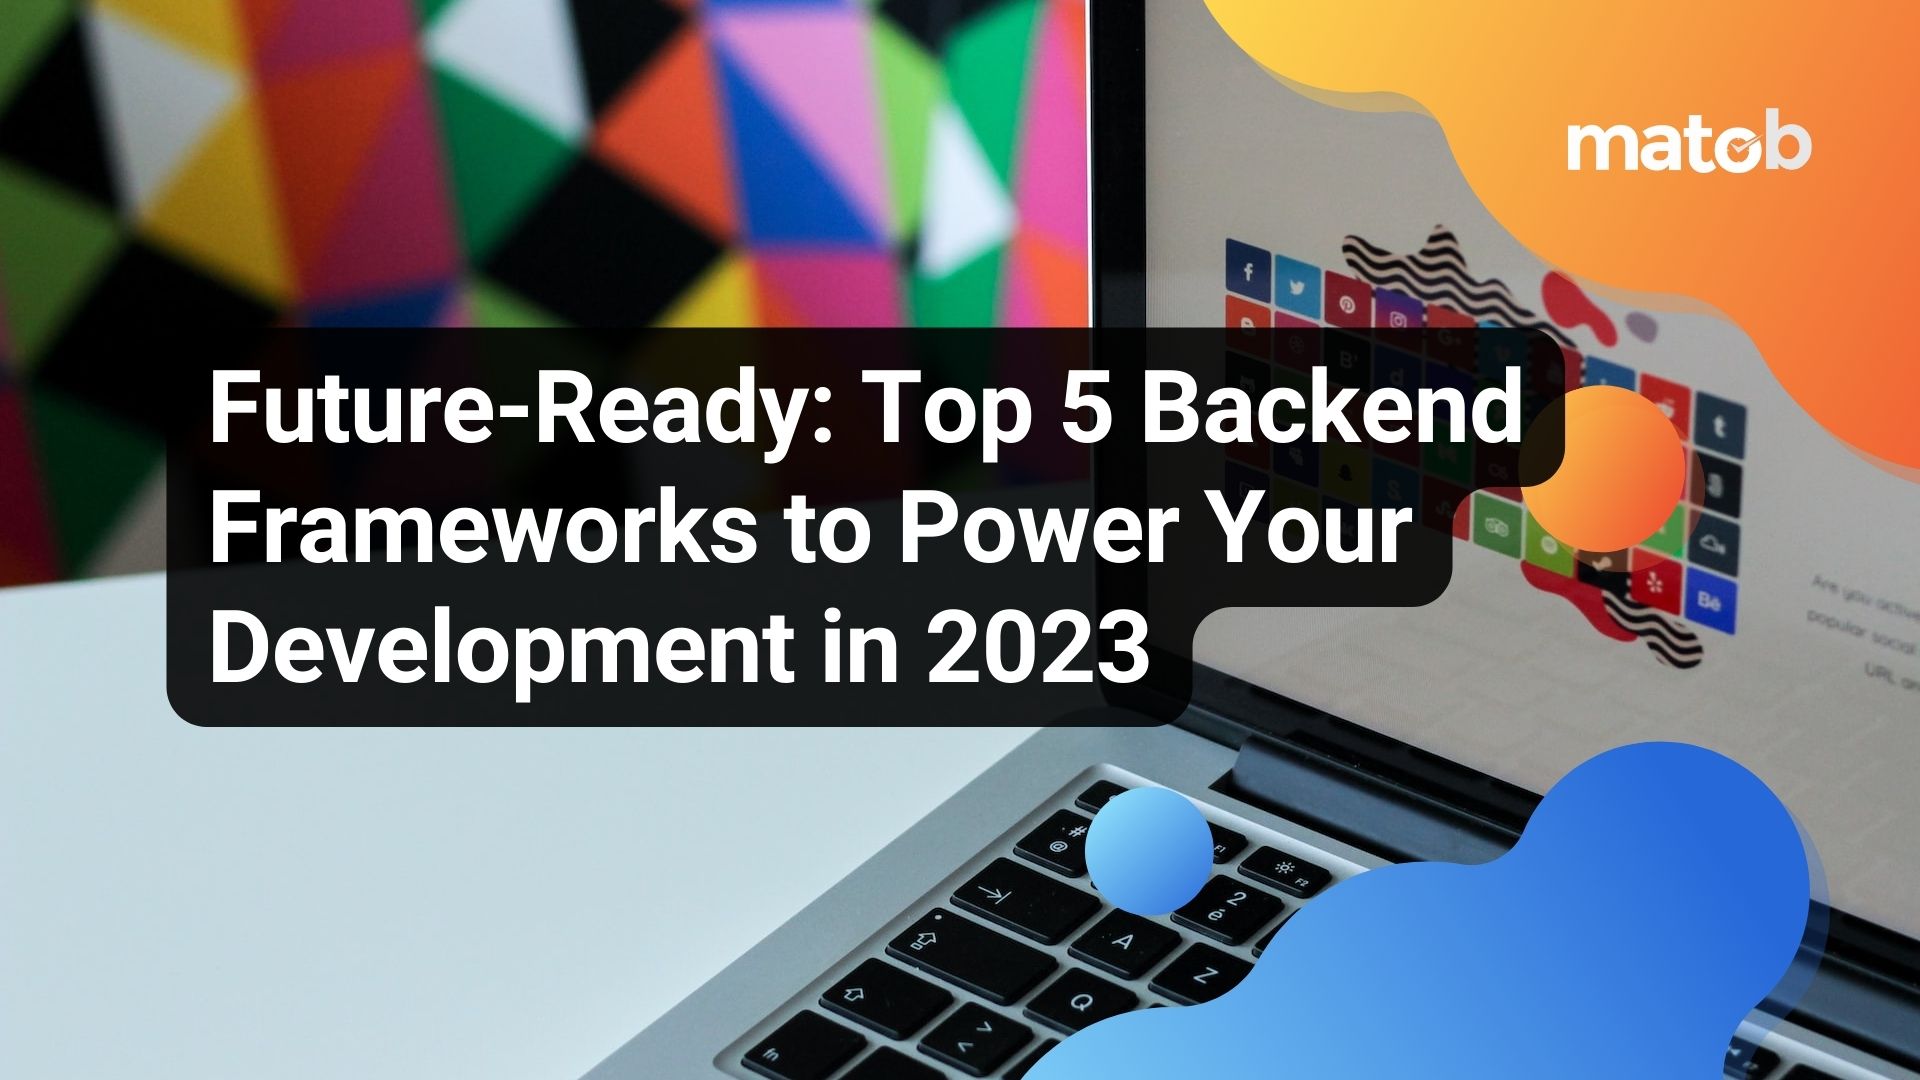 Future-Ready: Top 5 Backend Frameworks to Power Your Development in 2023